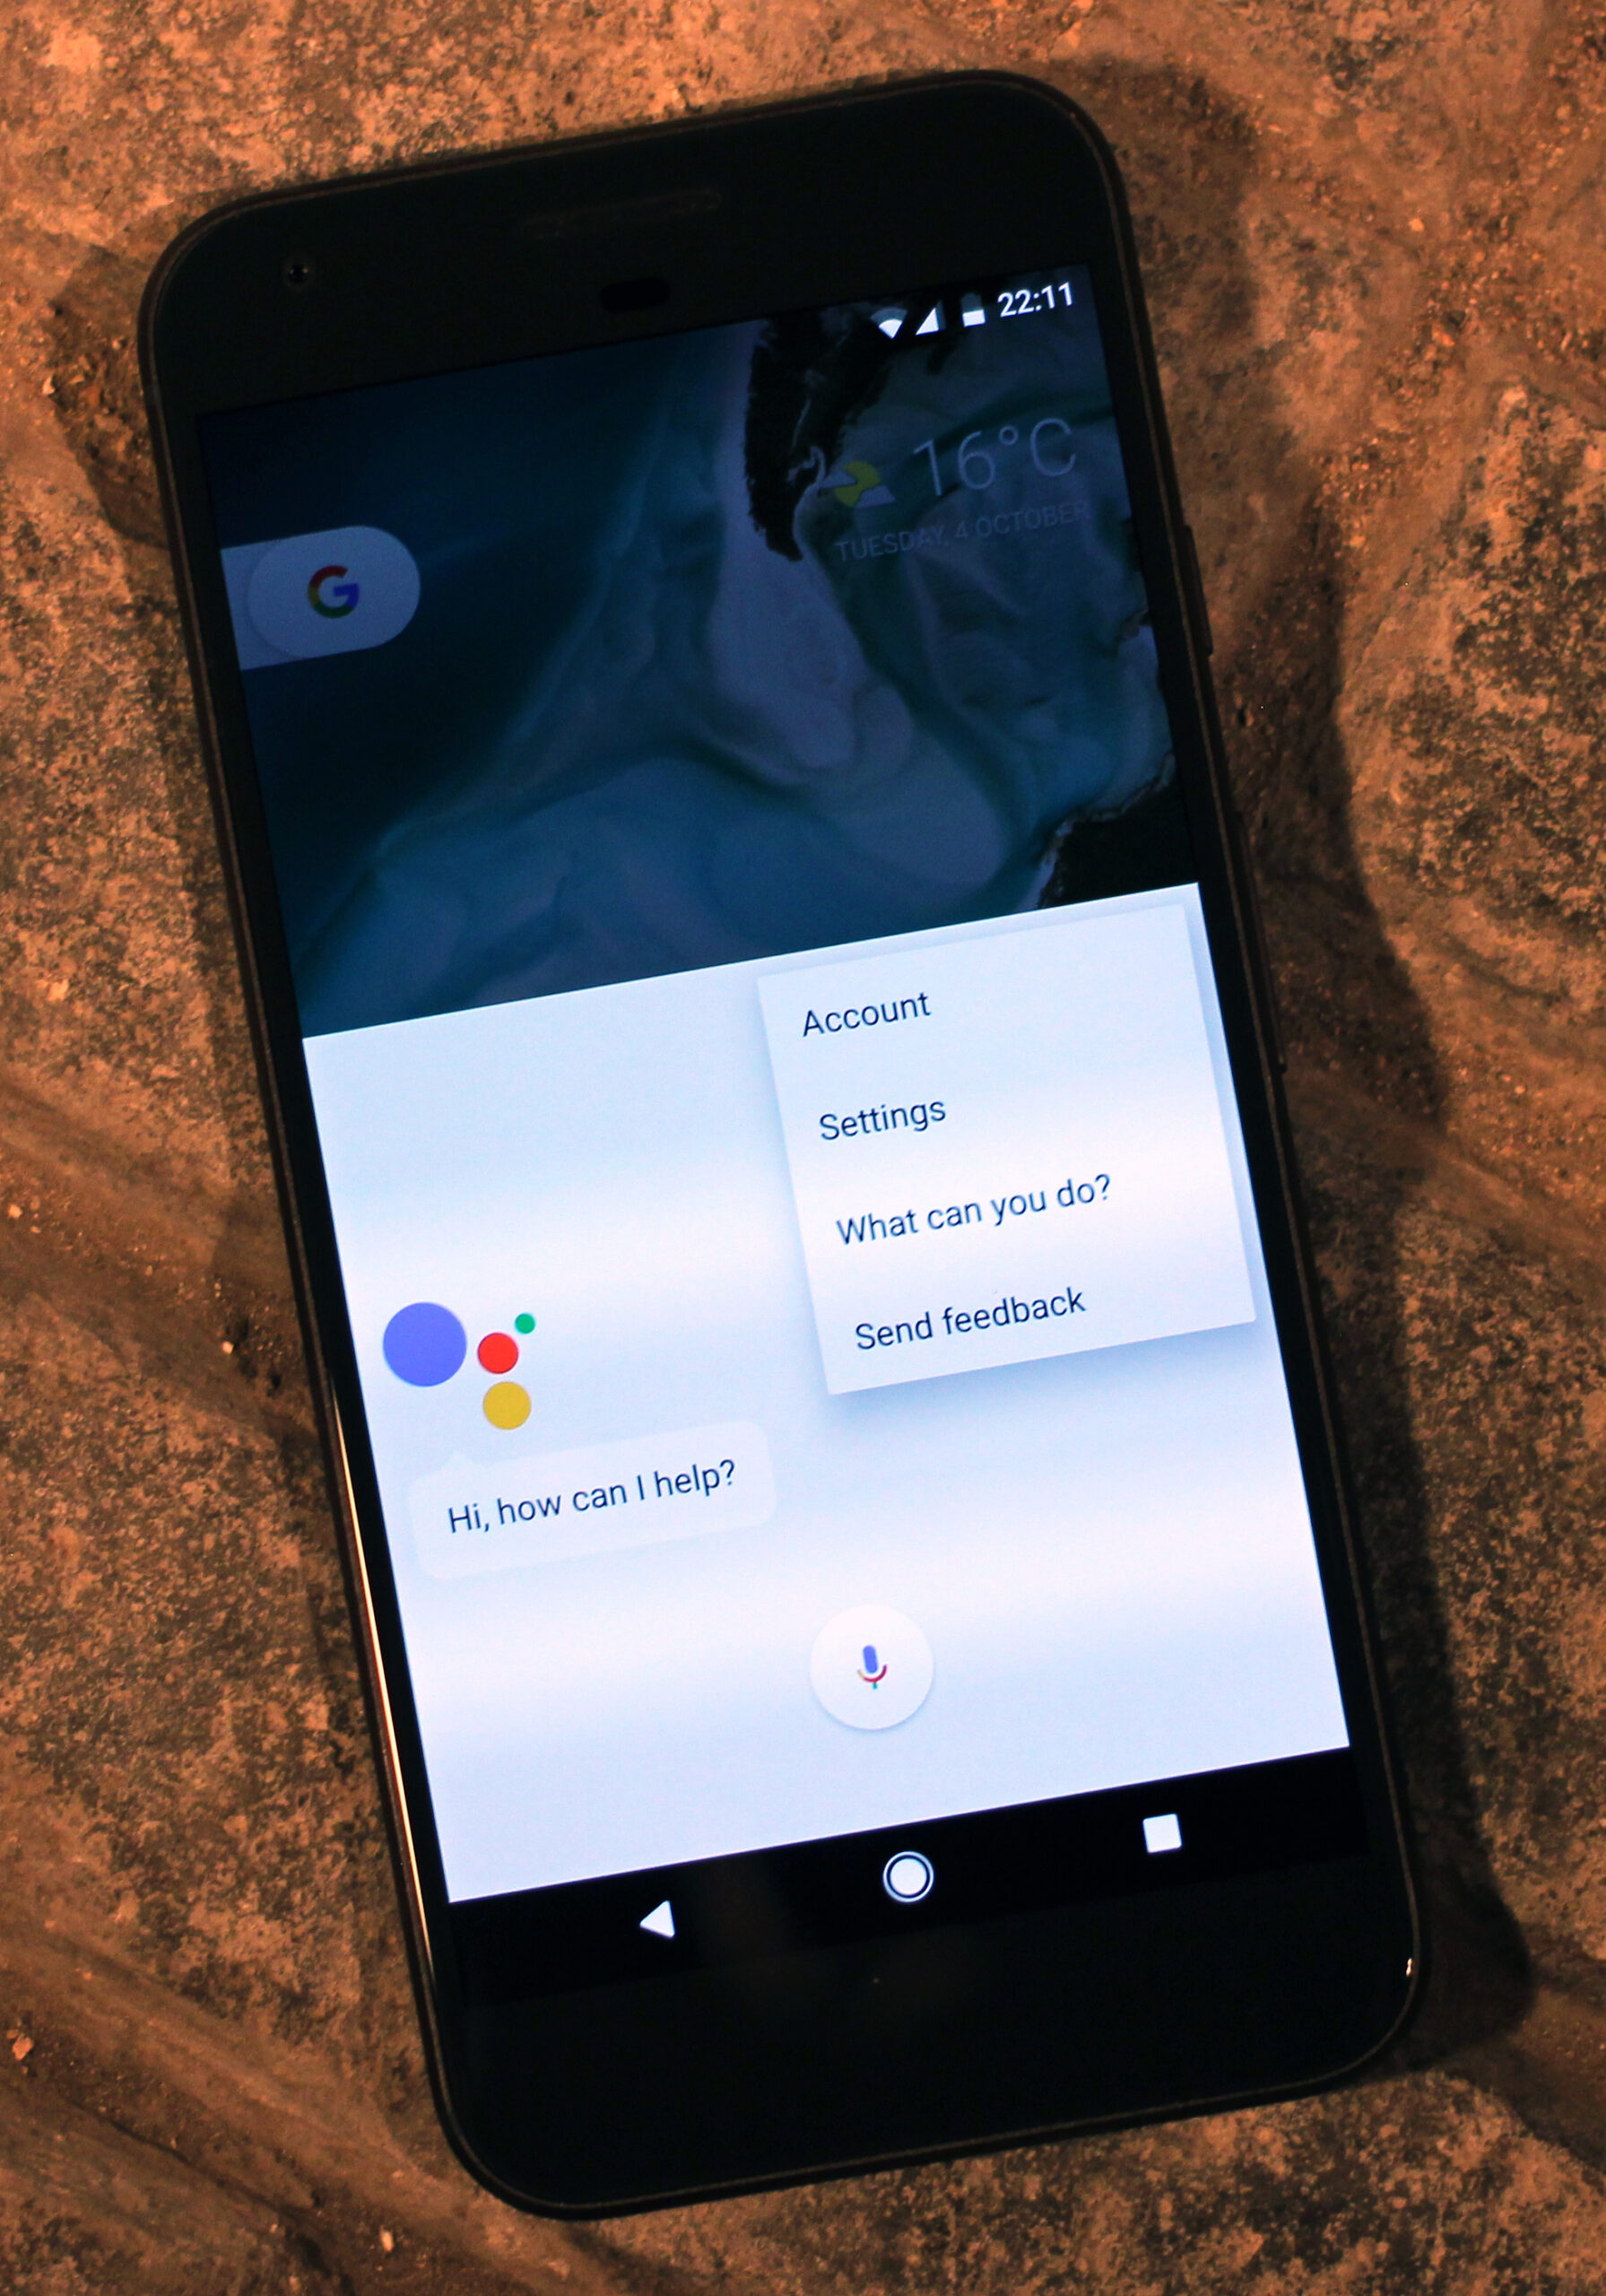 Android Assistant on the Google Pixel XL smartphone